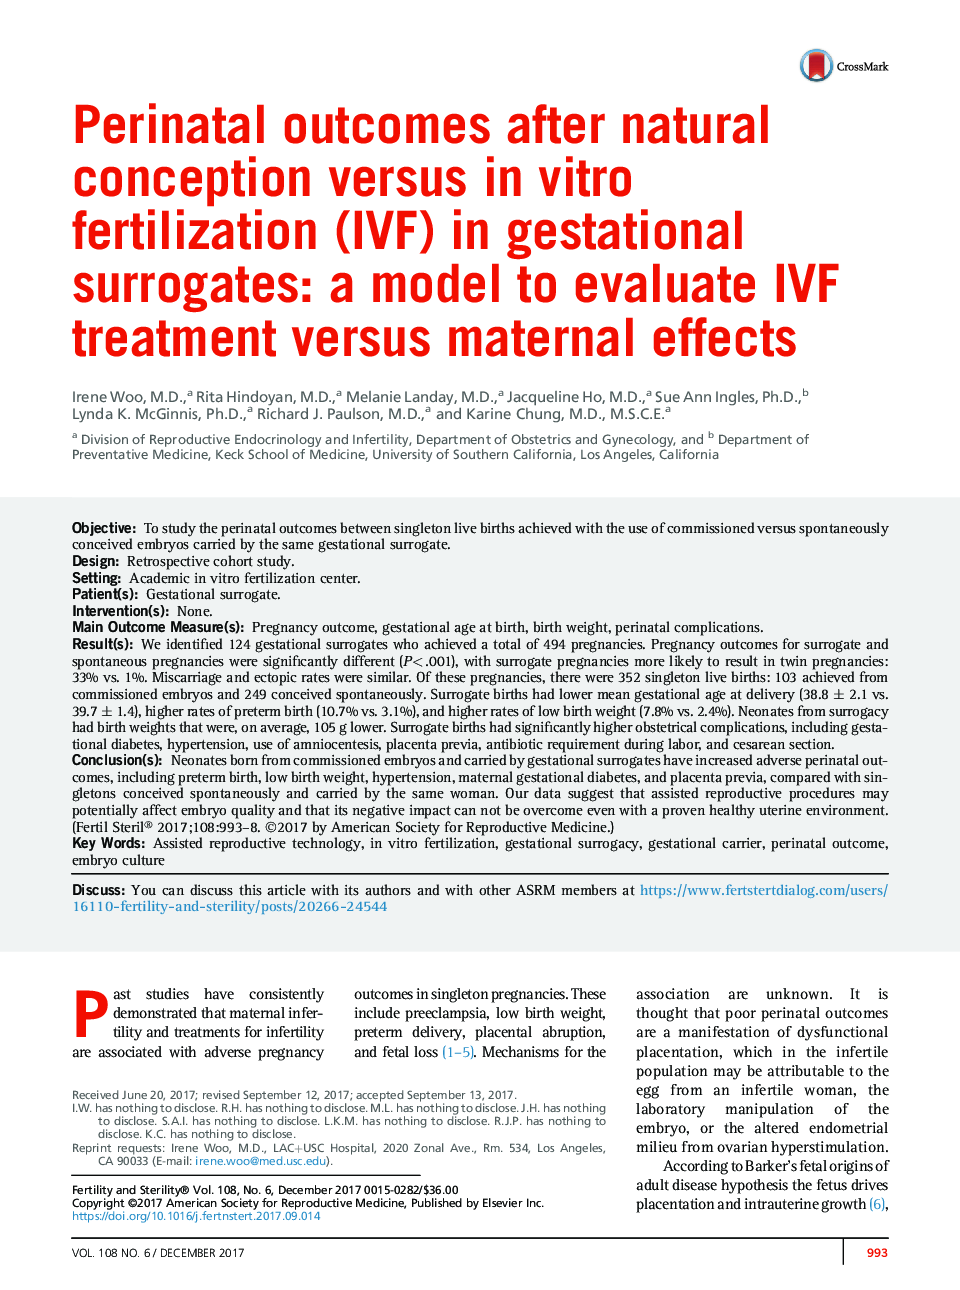 Perinatal outcomes after natural conception versus inÂ vitro fertilization (IVF) in gestational surrogates: a model to evaluate IVF treatment versus maternal effects